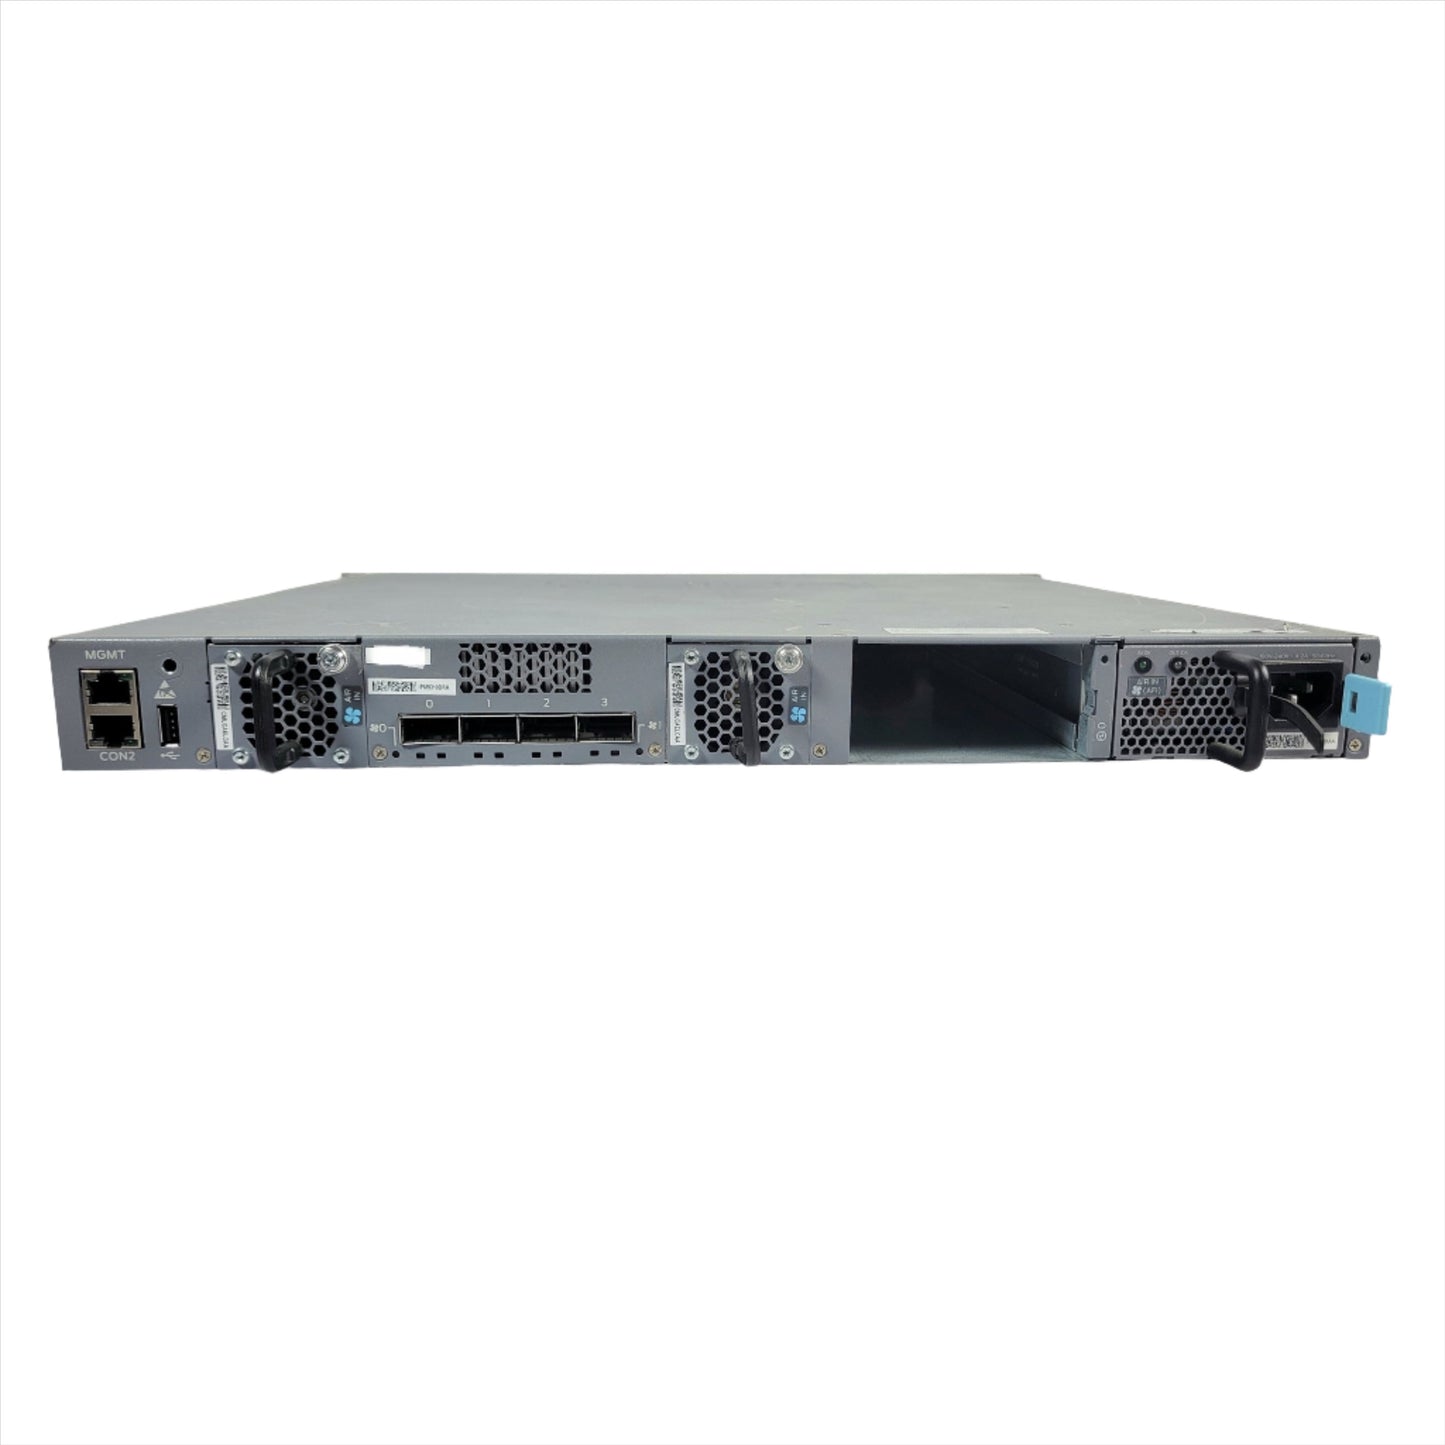 EX4300, 48-port 10/100/1000BaseT back-to-front airflow(inclu (Used - Good)